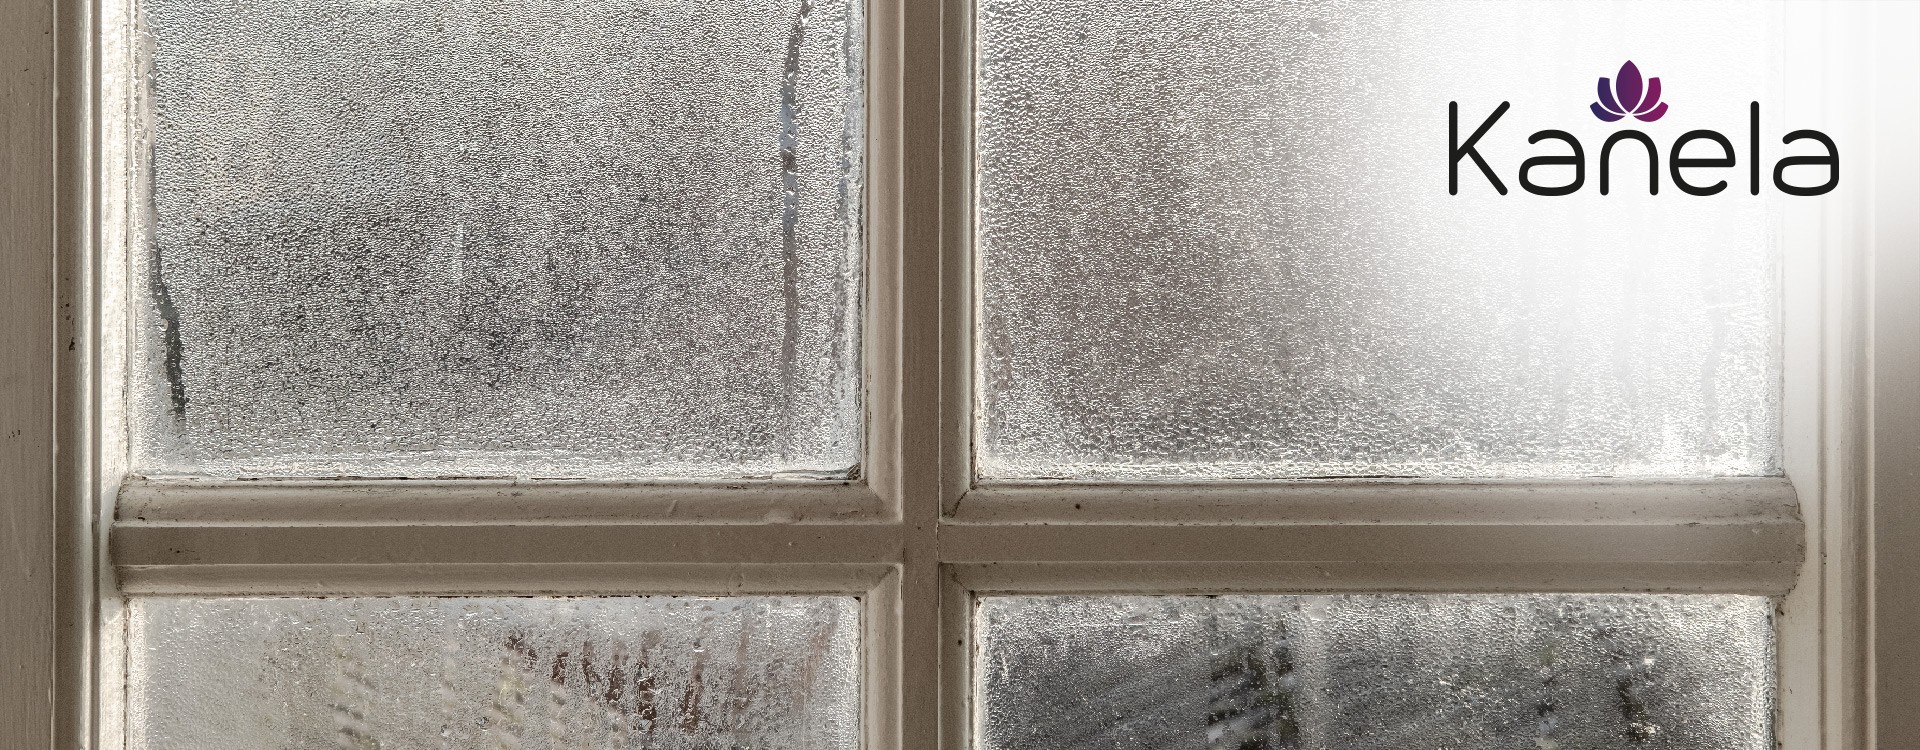 How often should you clean the windows?